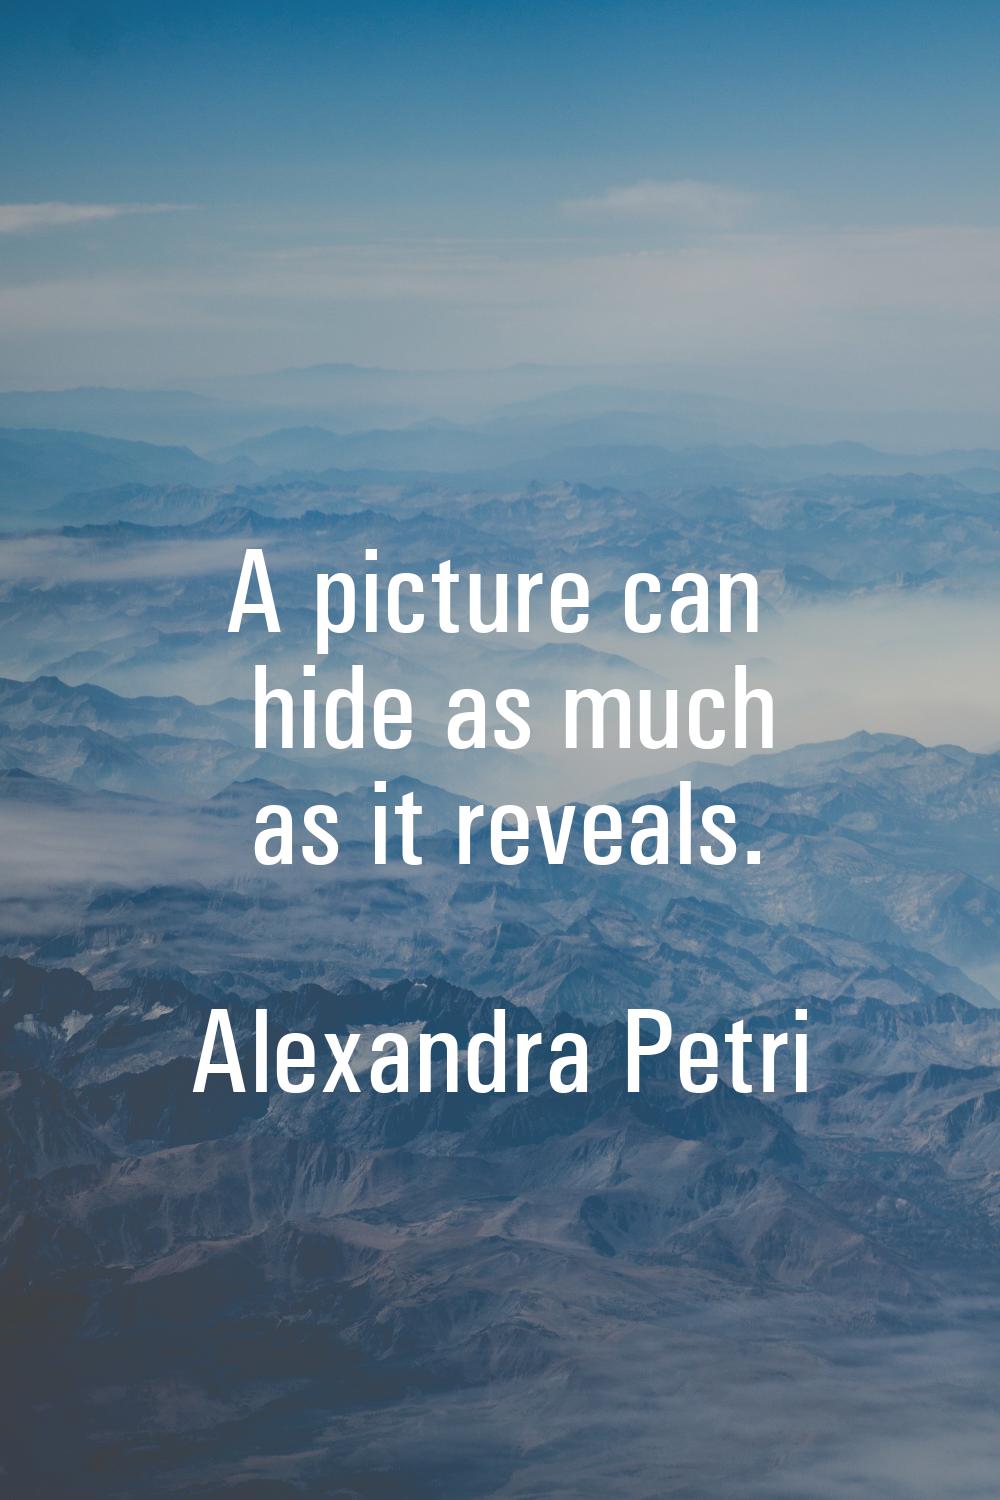 A picture can hide as much as it reveals.